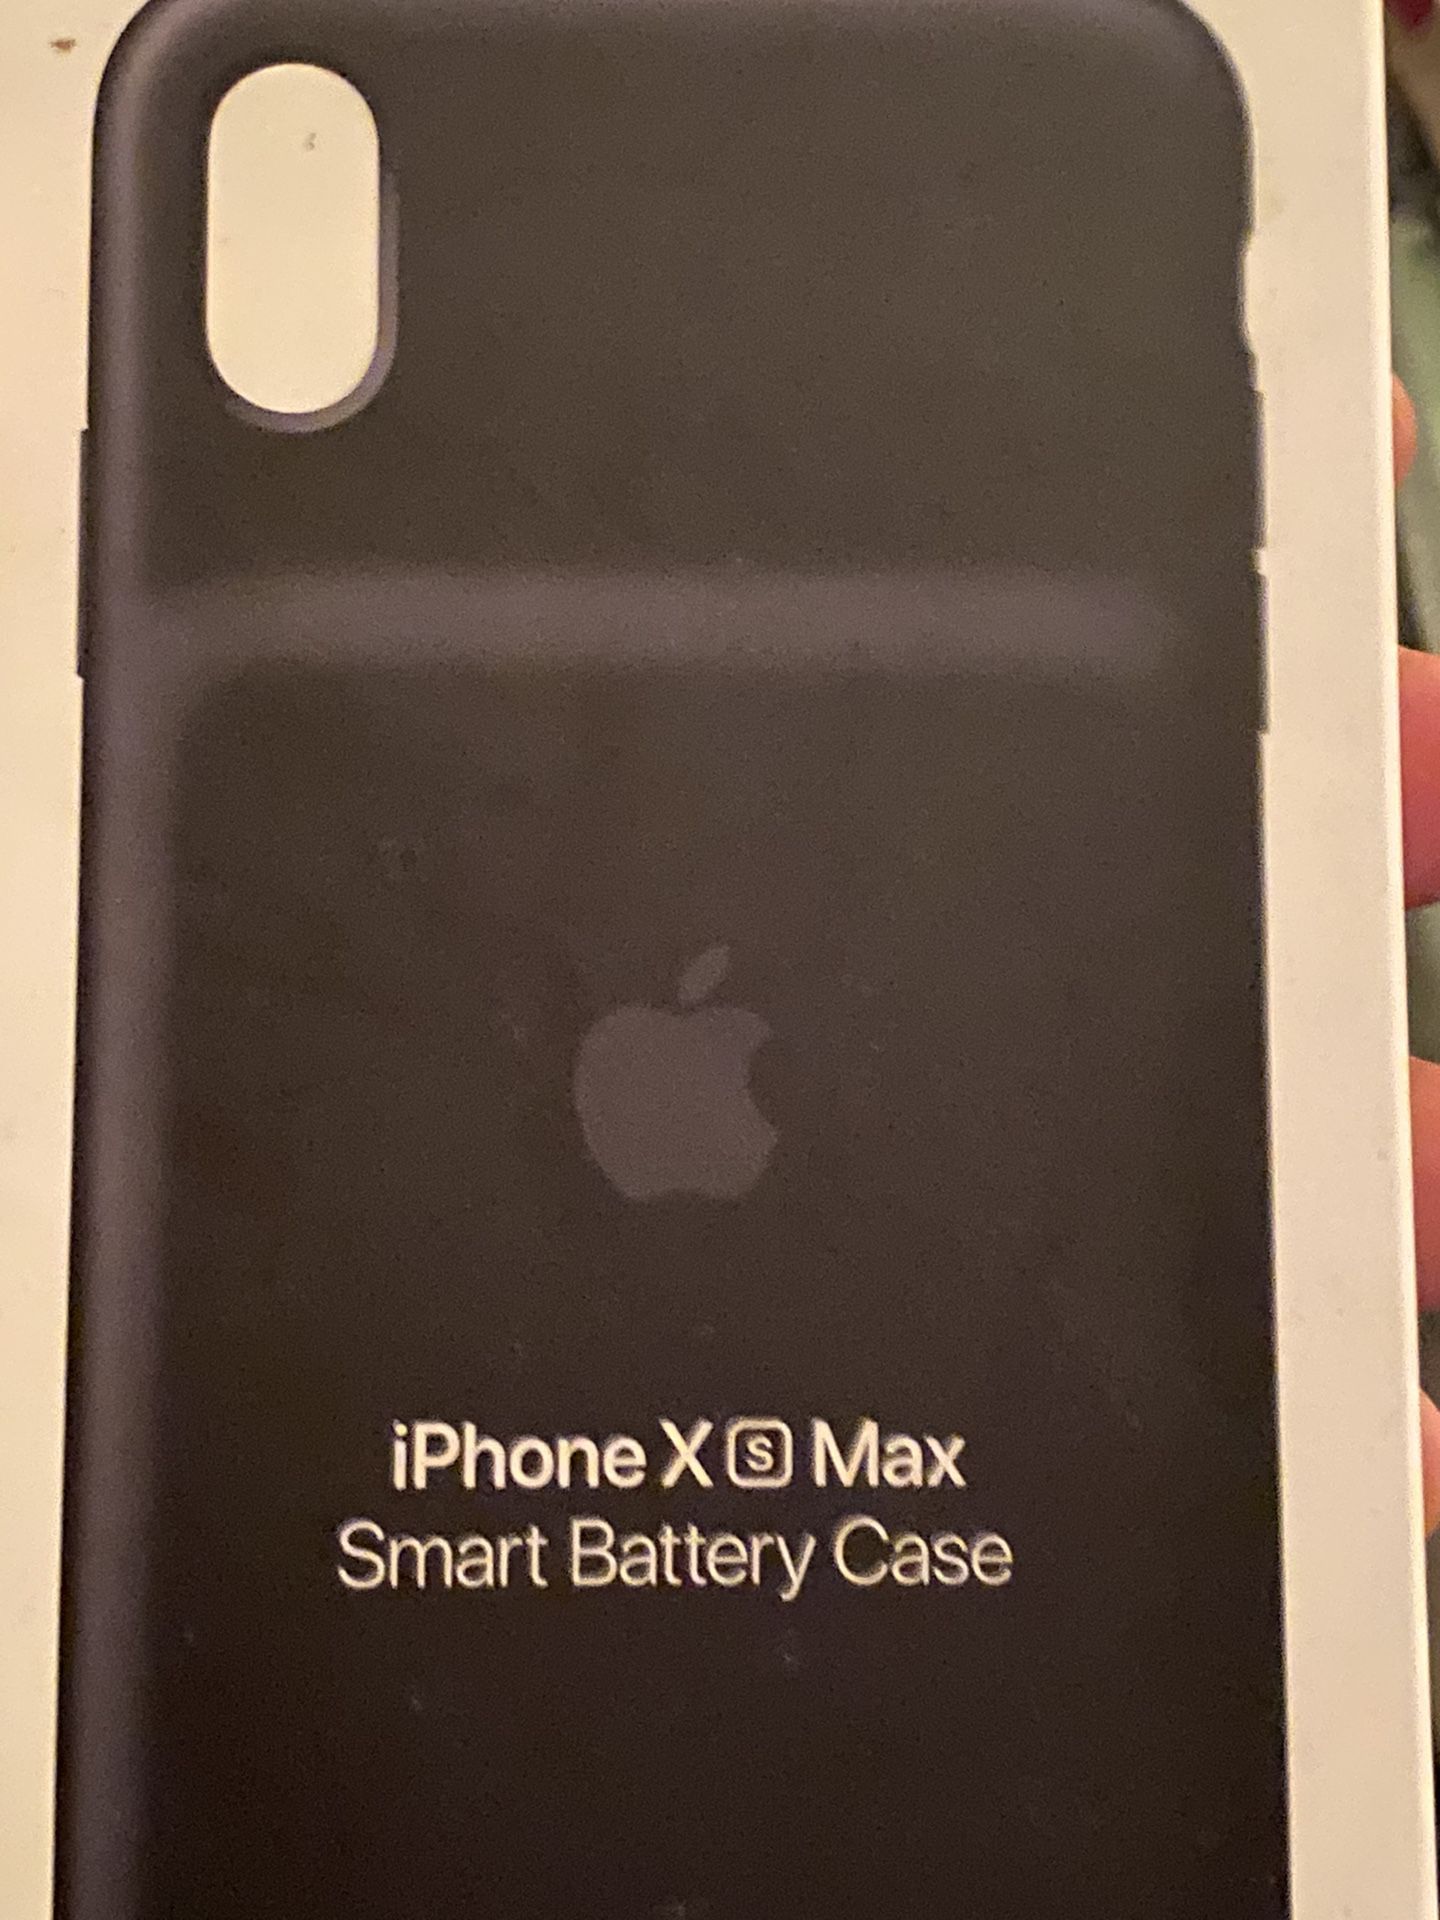 iPhone XS Max battery case